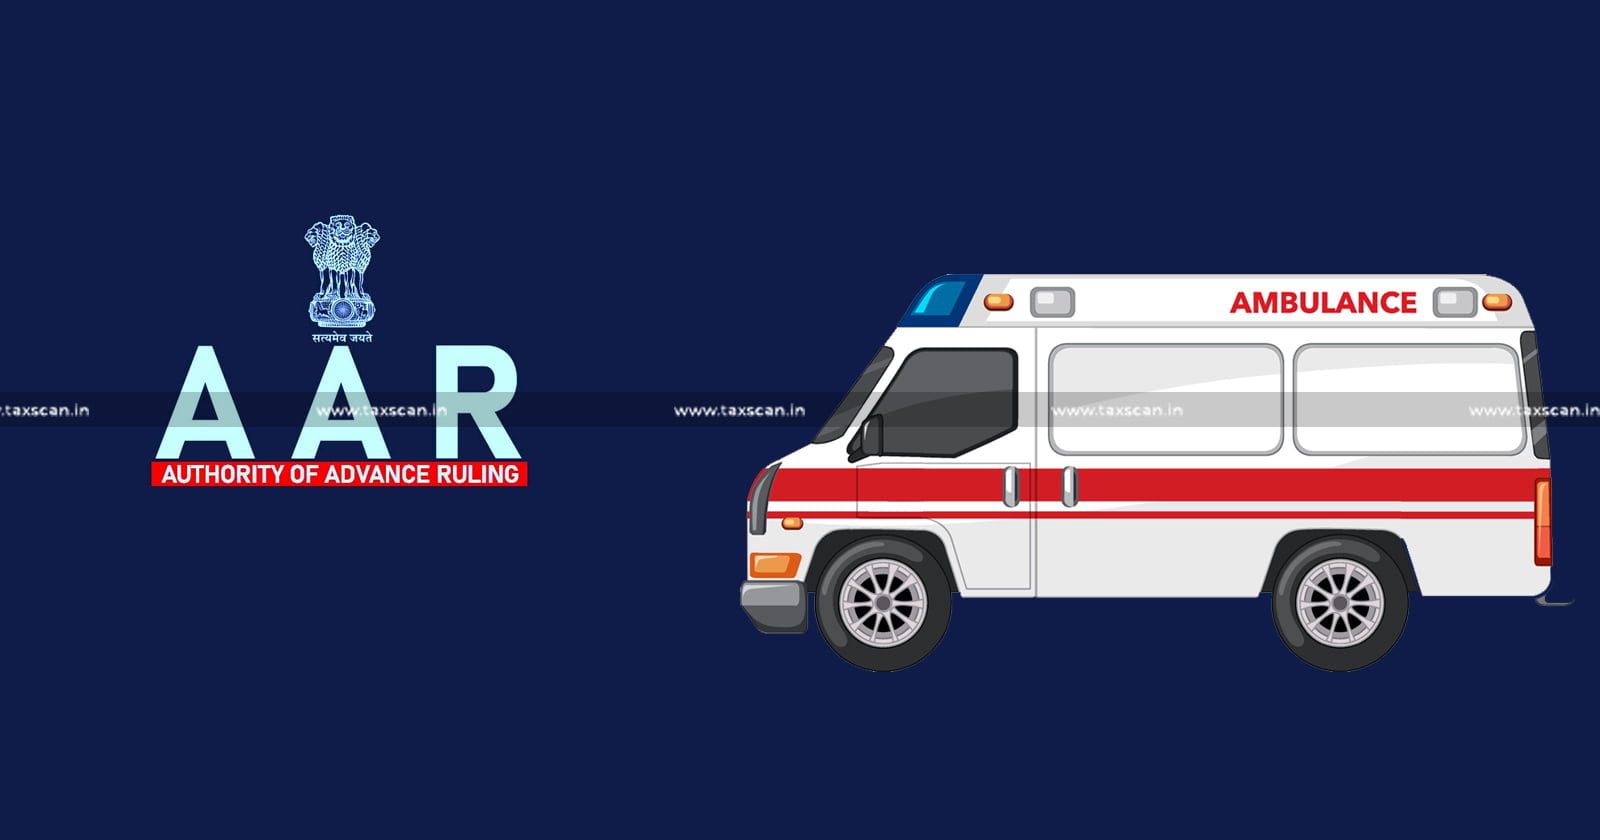 AAR- ITC- GST-Purchase-Vehicles-modify- services-supply-ambulance services-taxscan